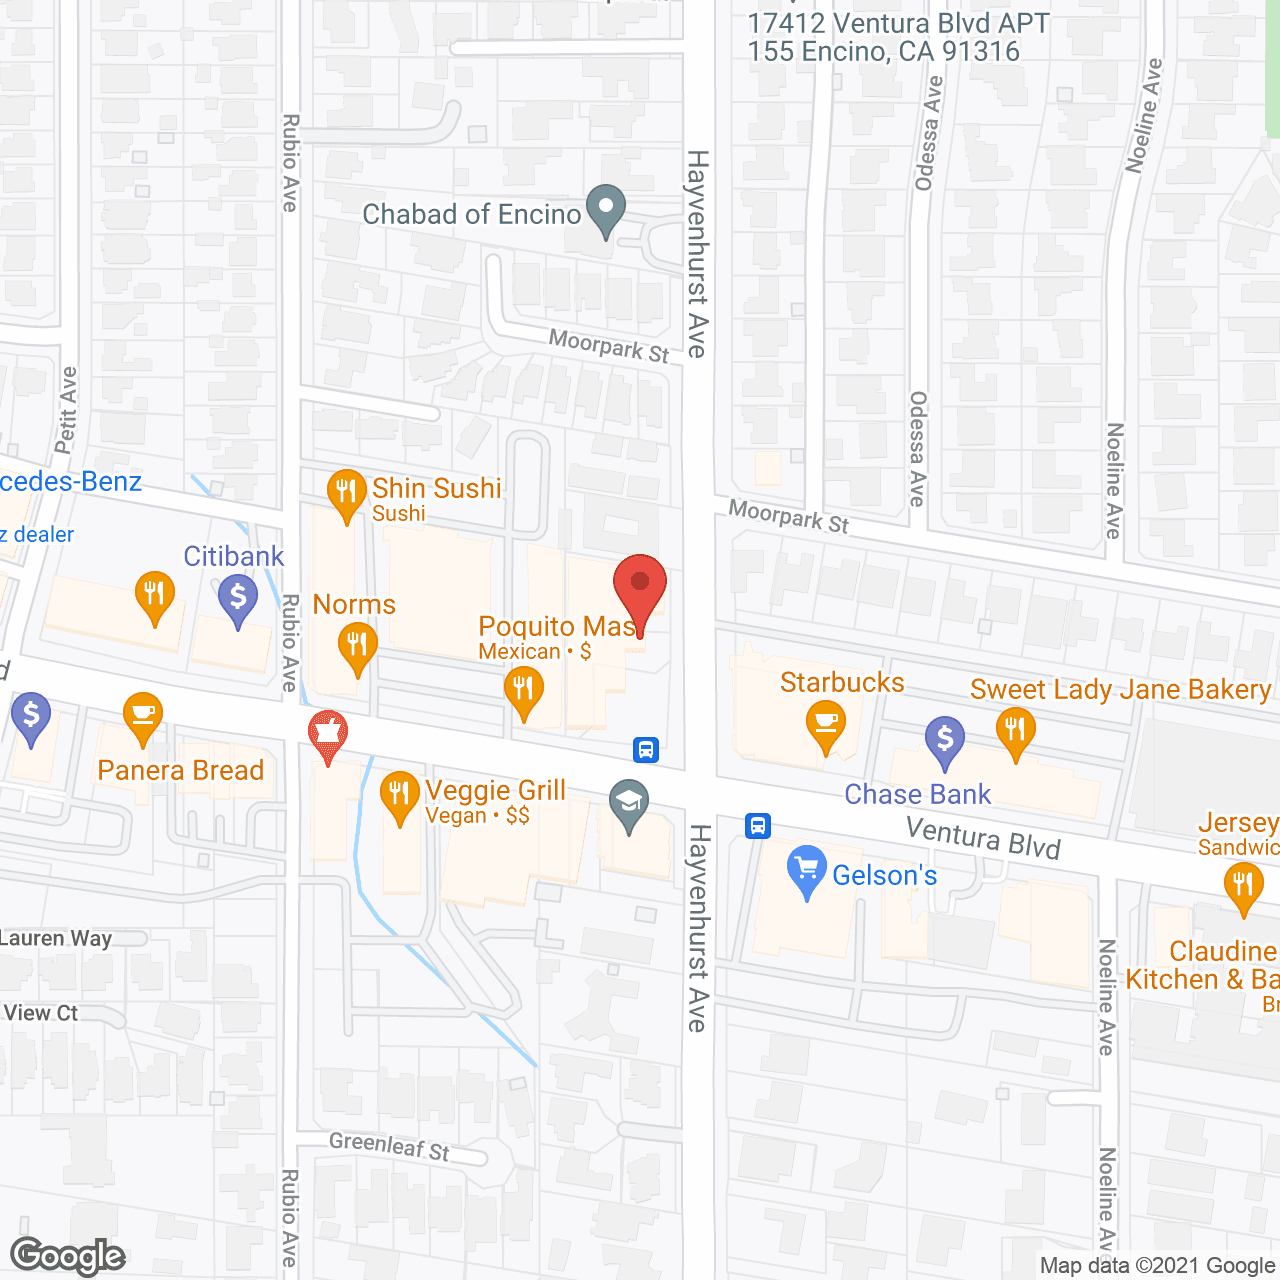 TheKey of Encino, CA in google map